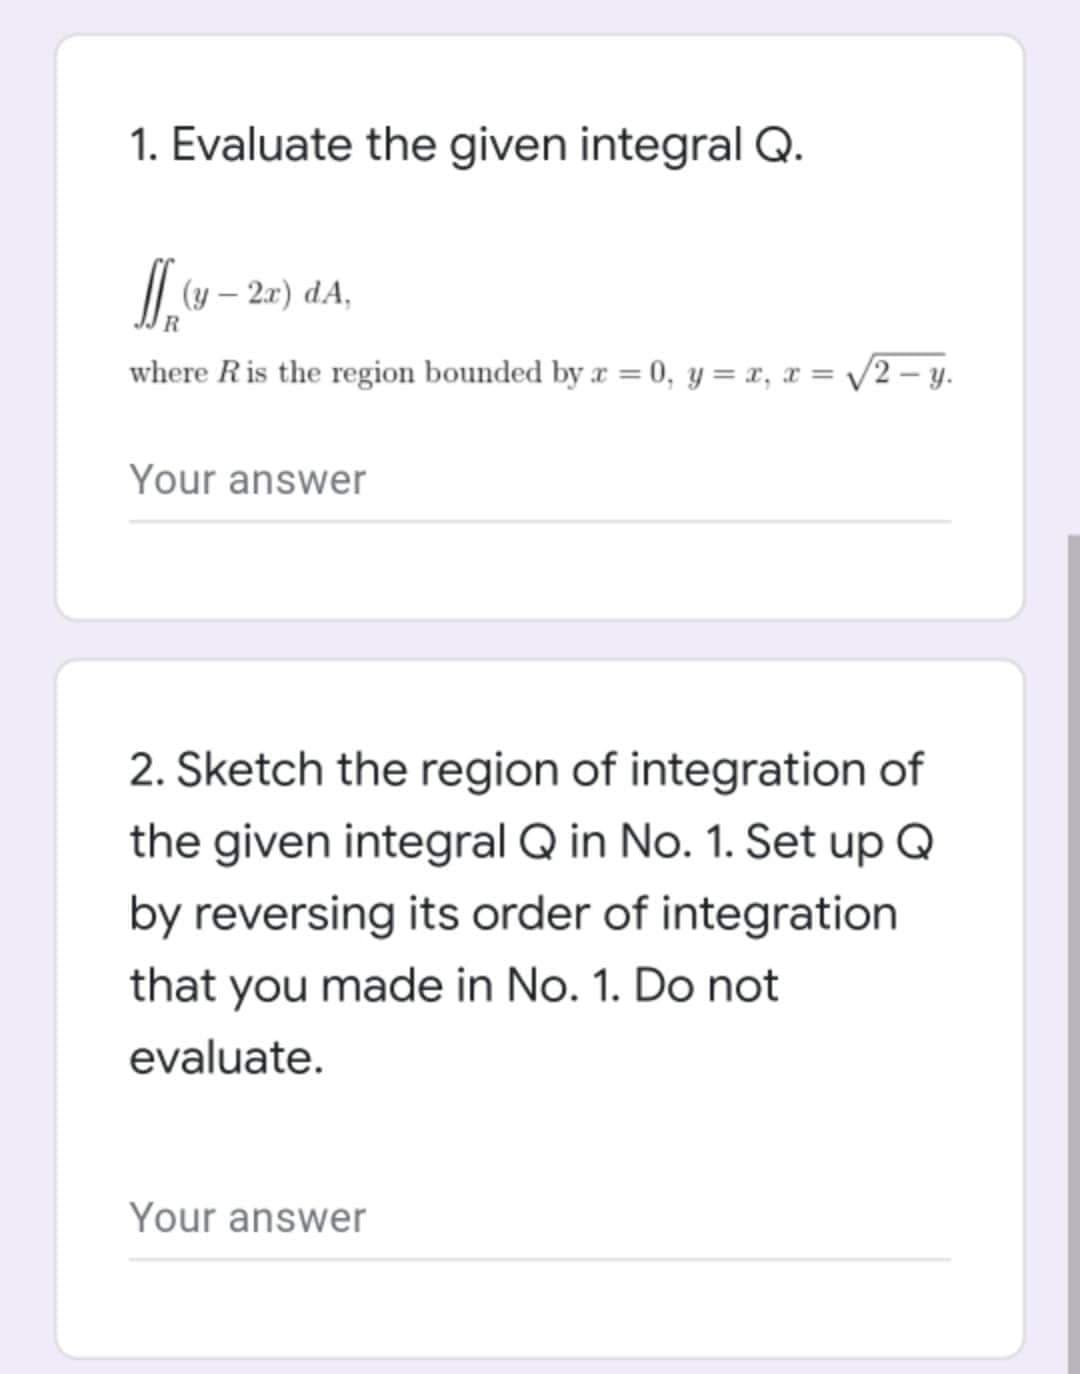 1. Evaluate the given integral Q.
[(y - 2x) dA,
R
where R is the region bounded by x = 0, y = x, x = √√√2-y.
Your answer
2. Sketch the region of integration of
the given integral Q in No. 1. Set up Q
by reversing its order of integration
that you made in No. 1. Do not
evaluate.
Your answer